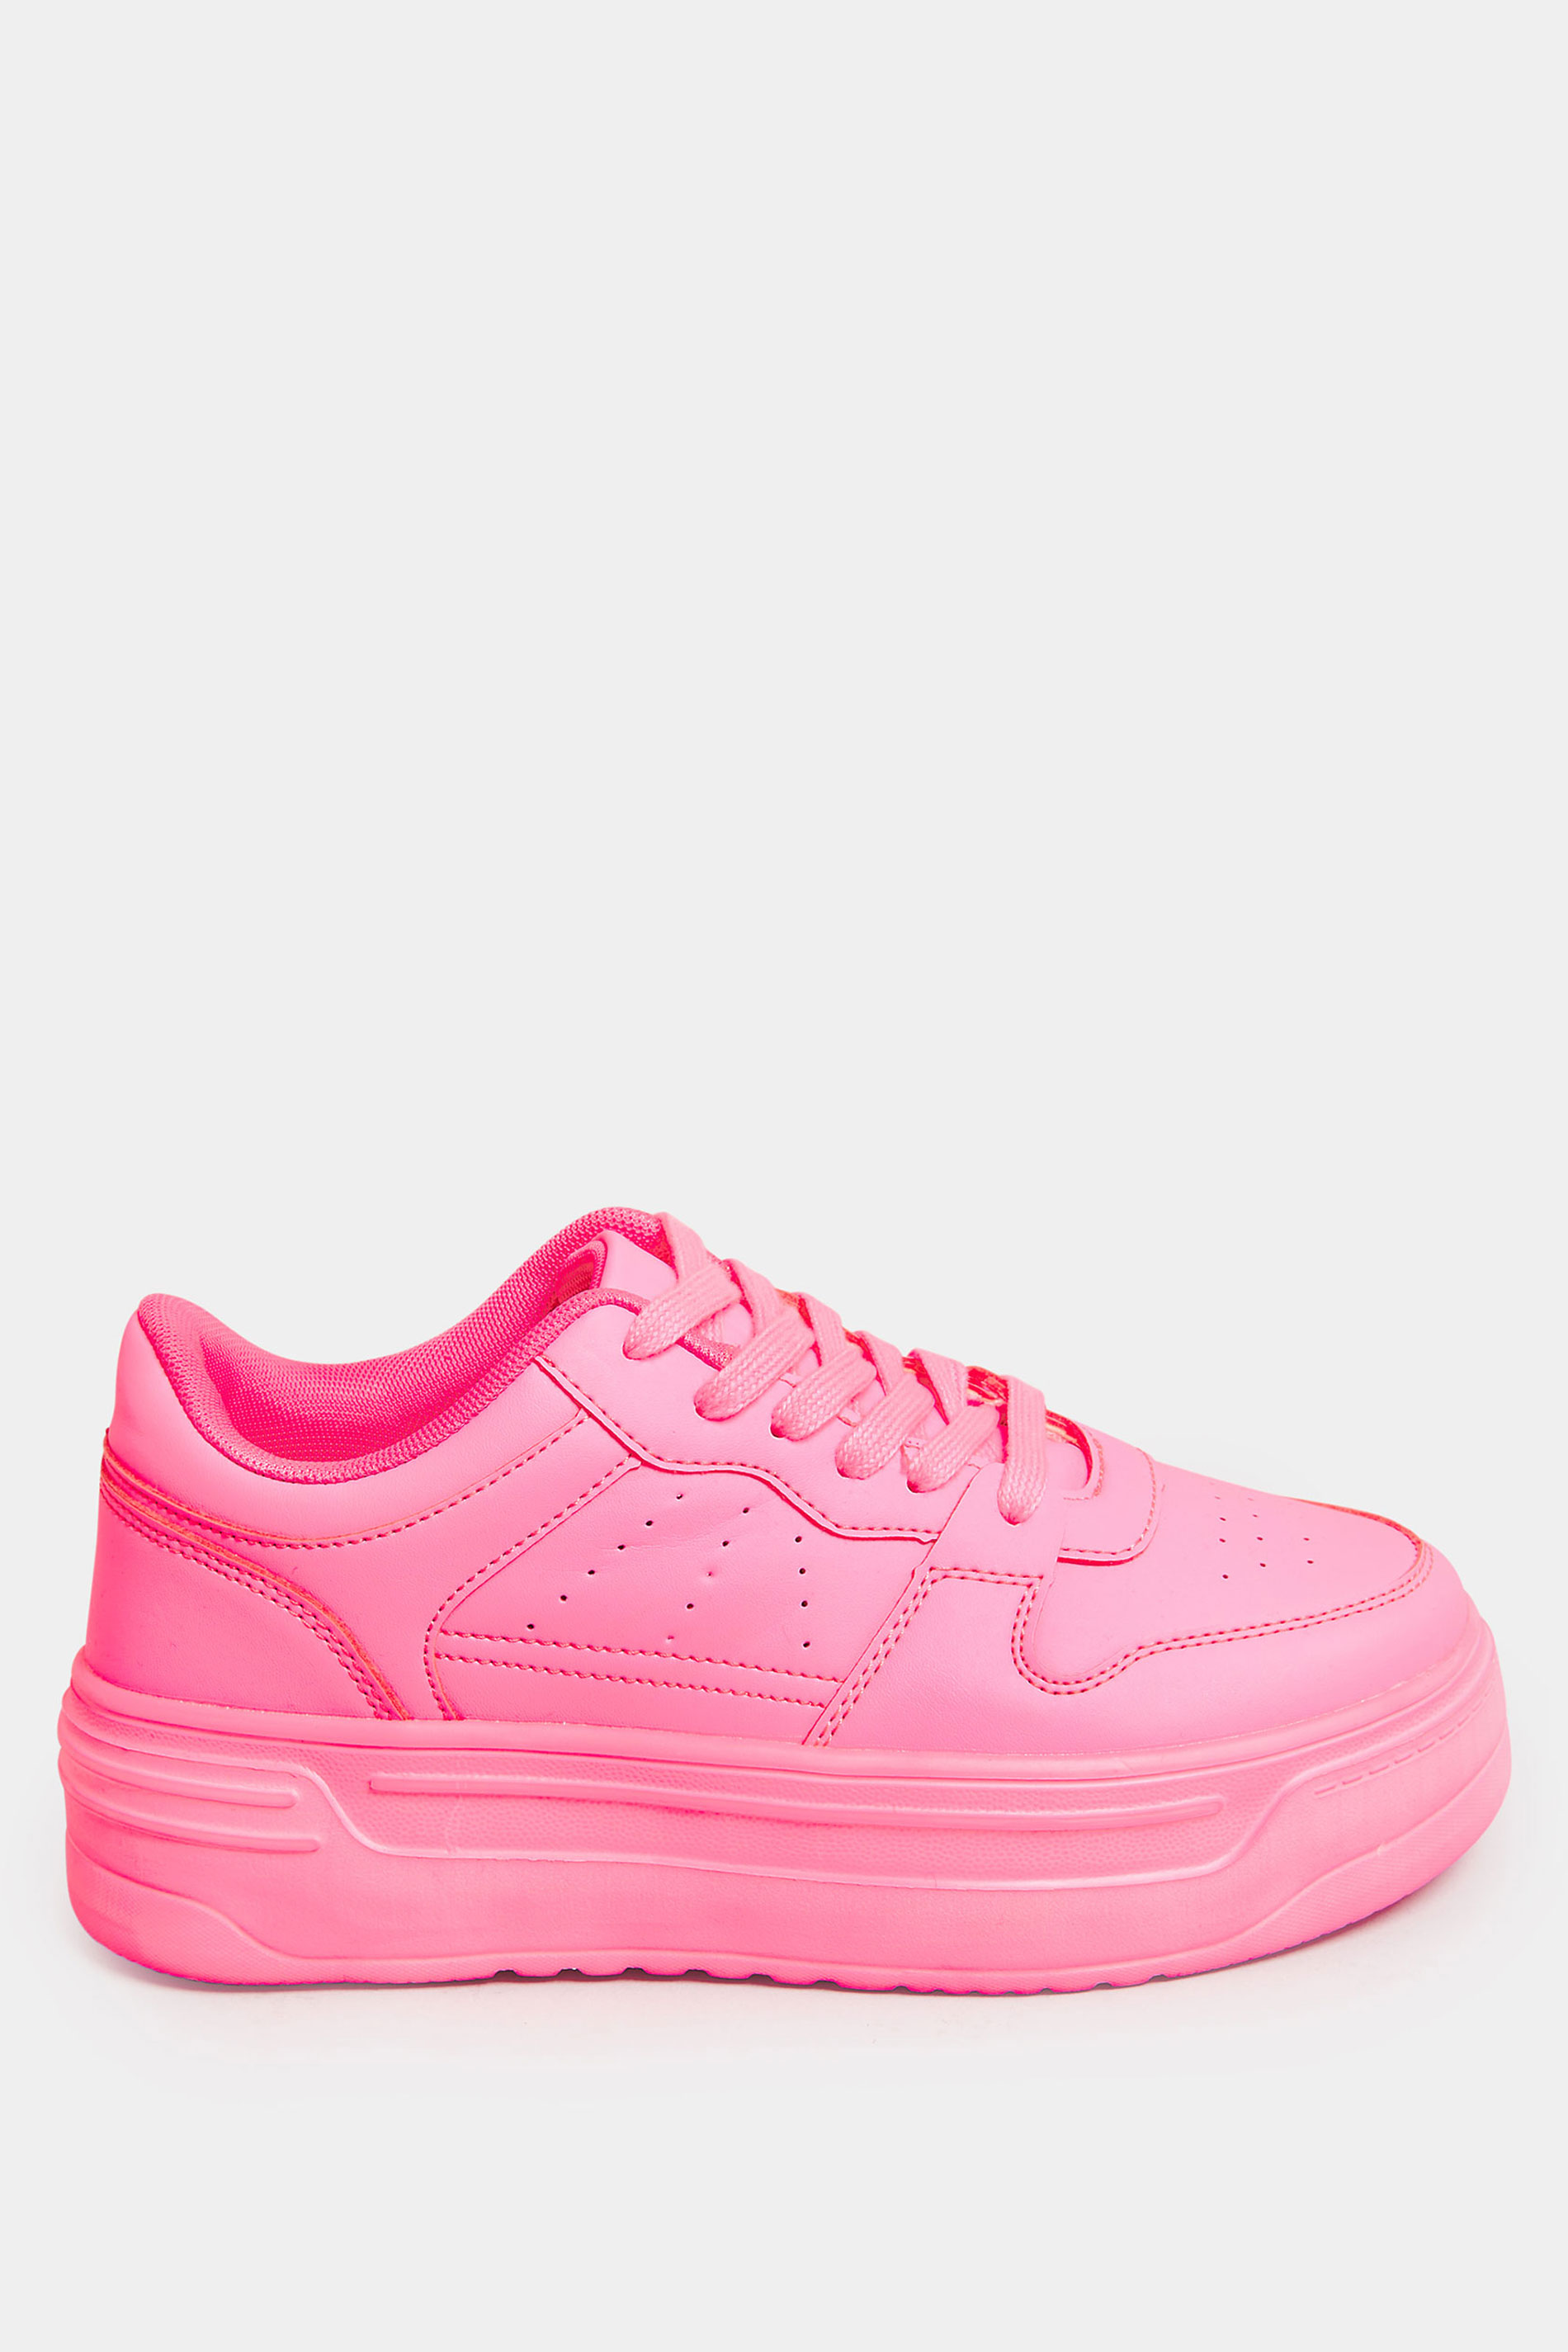 Neon Pink Chunky Trainers In Extra Wide EEE Fit | Yours Clothing  3